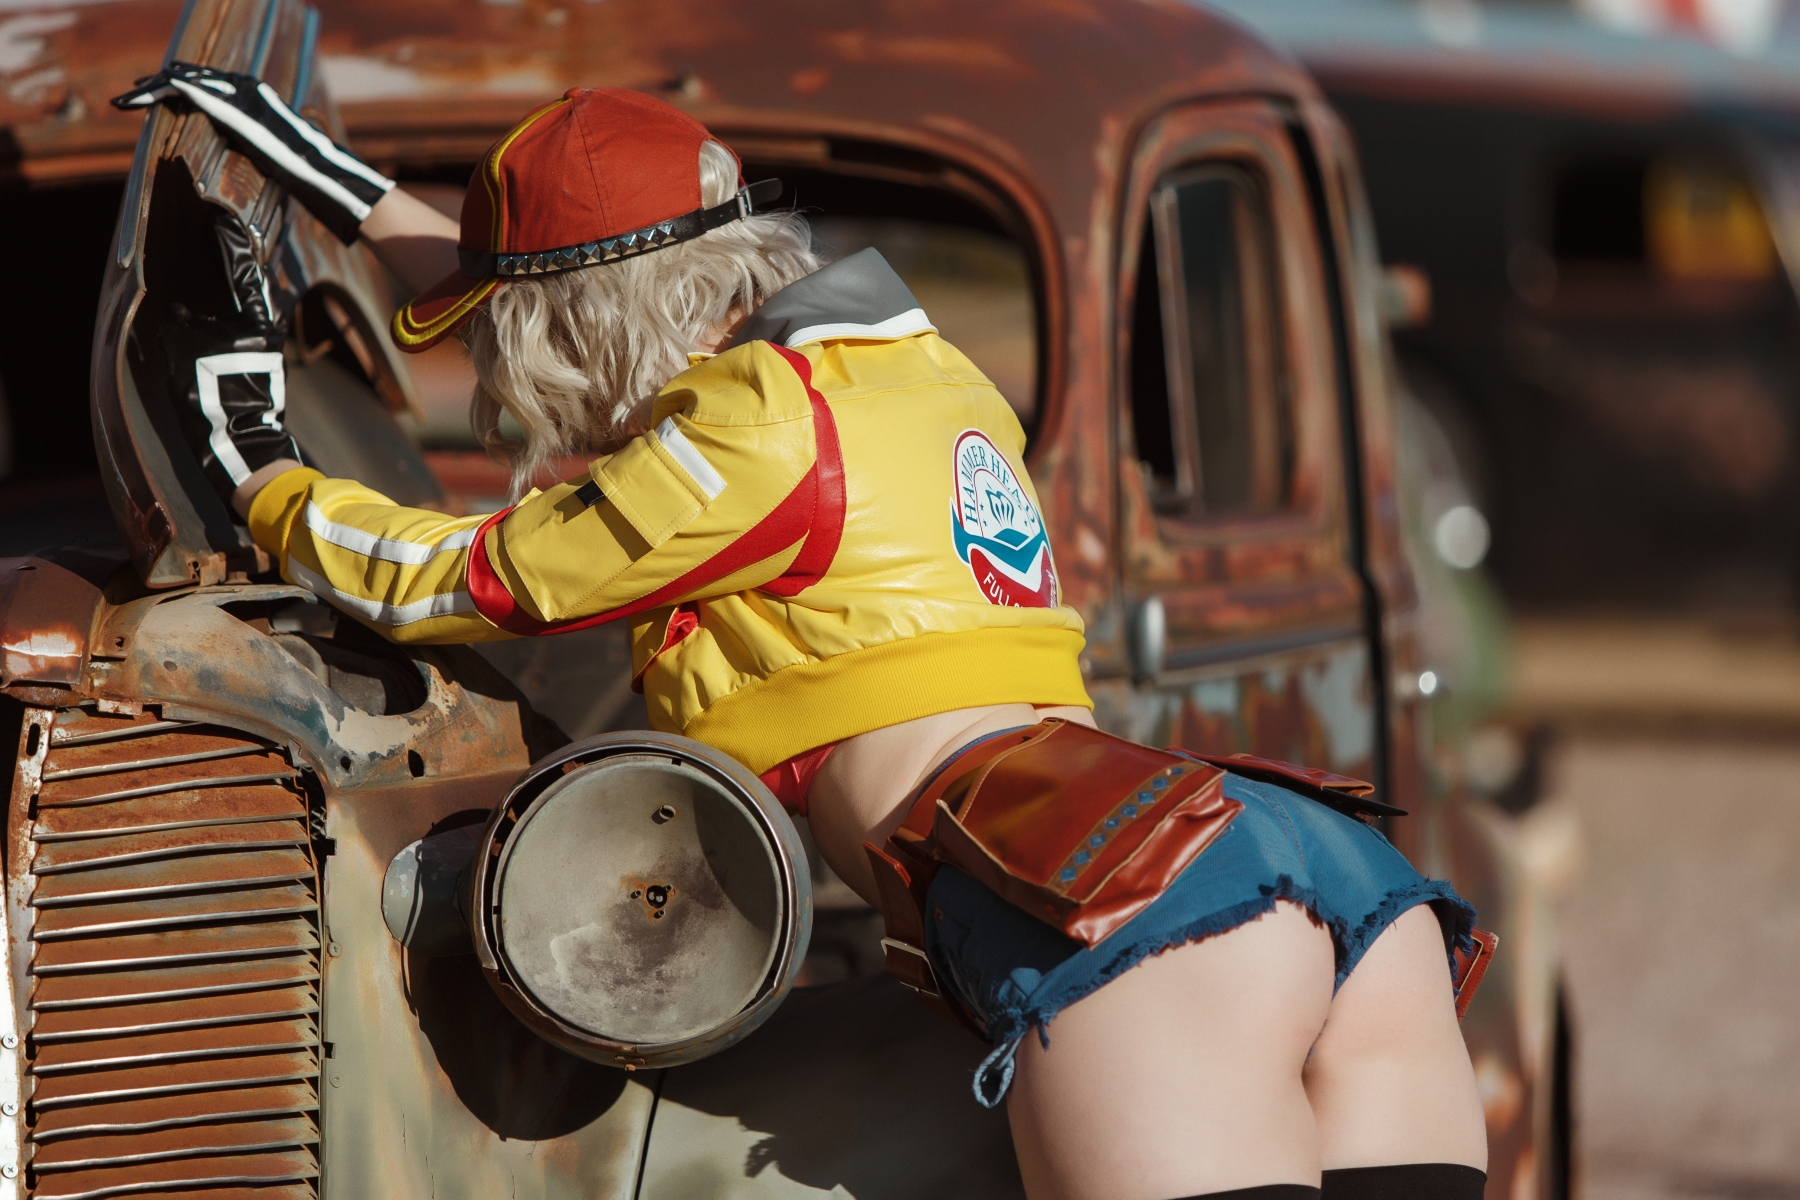 People 1800x1200 Holly Wolf women model blonde Final Fantasy XV video games cosplay video game characters video game girls baseball cap jacket yellow jacket belt jean shorts high waisted shorts ass thigh-highs women with cars gloves mechanics outdoors women outdoors Cindy Aurum